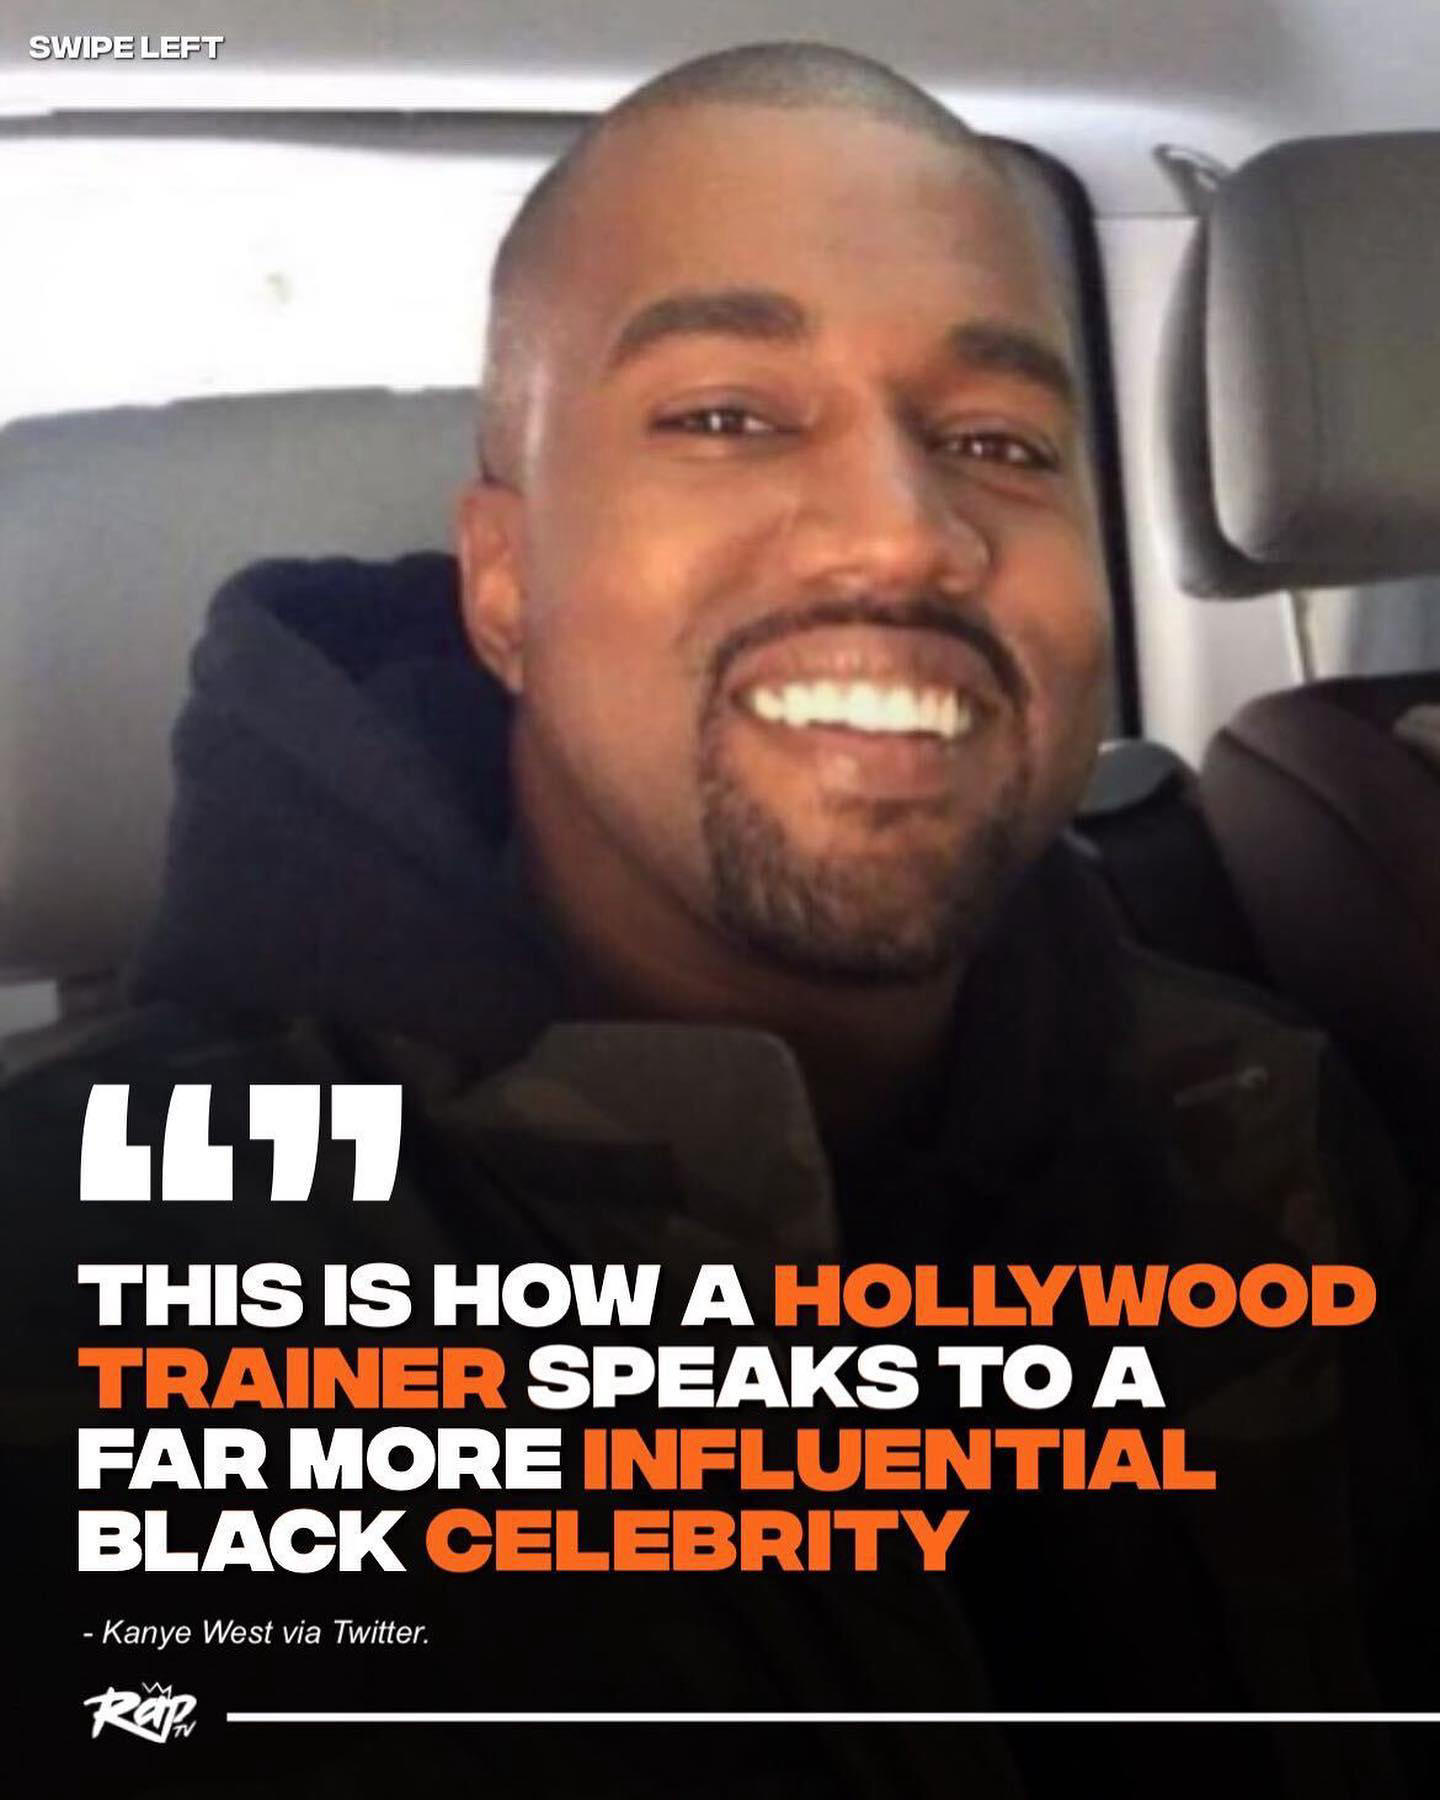 RapTV - #KanyeWest revealed that #HarleyPasternak said he would have him institutionalized again if